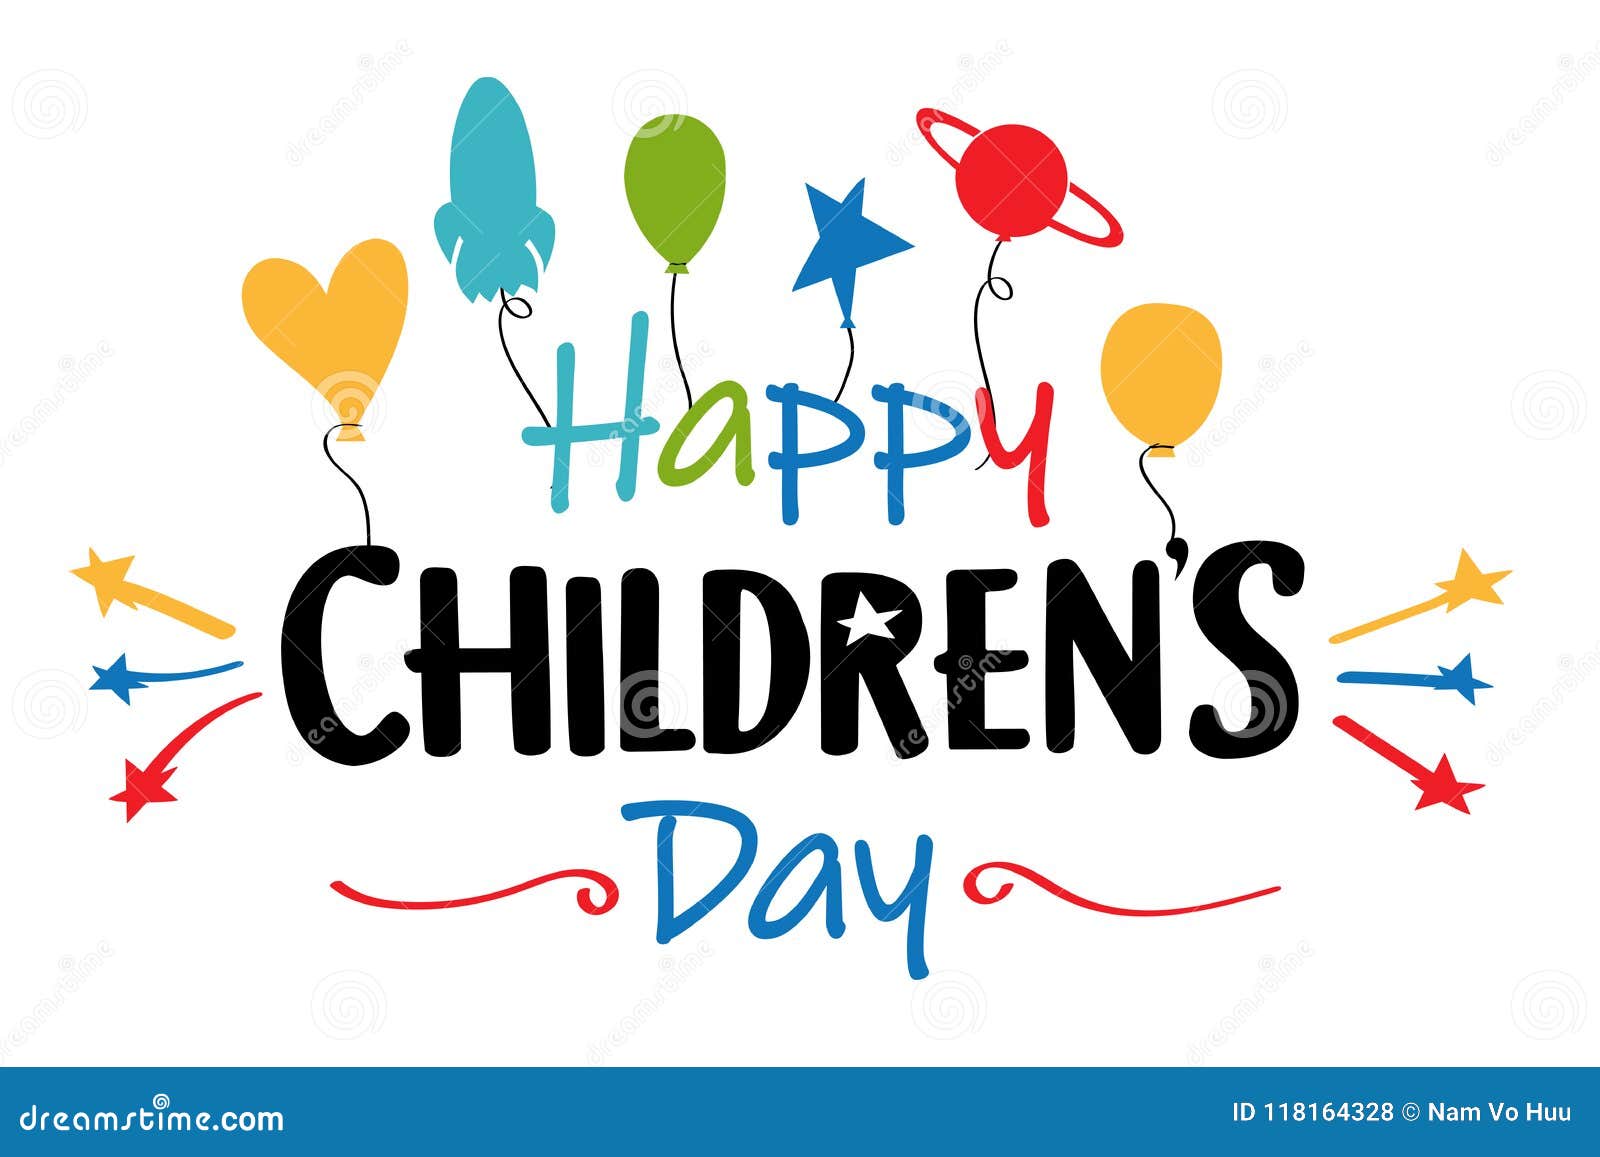 Childrens Day Stock Illustrations – 13,688 Childrens Day Stock ...